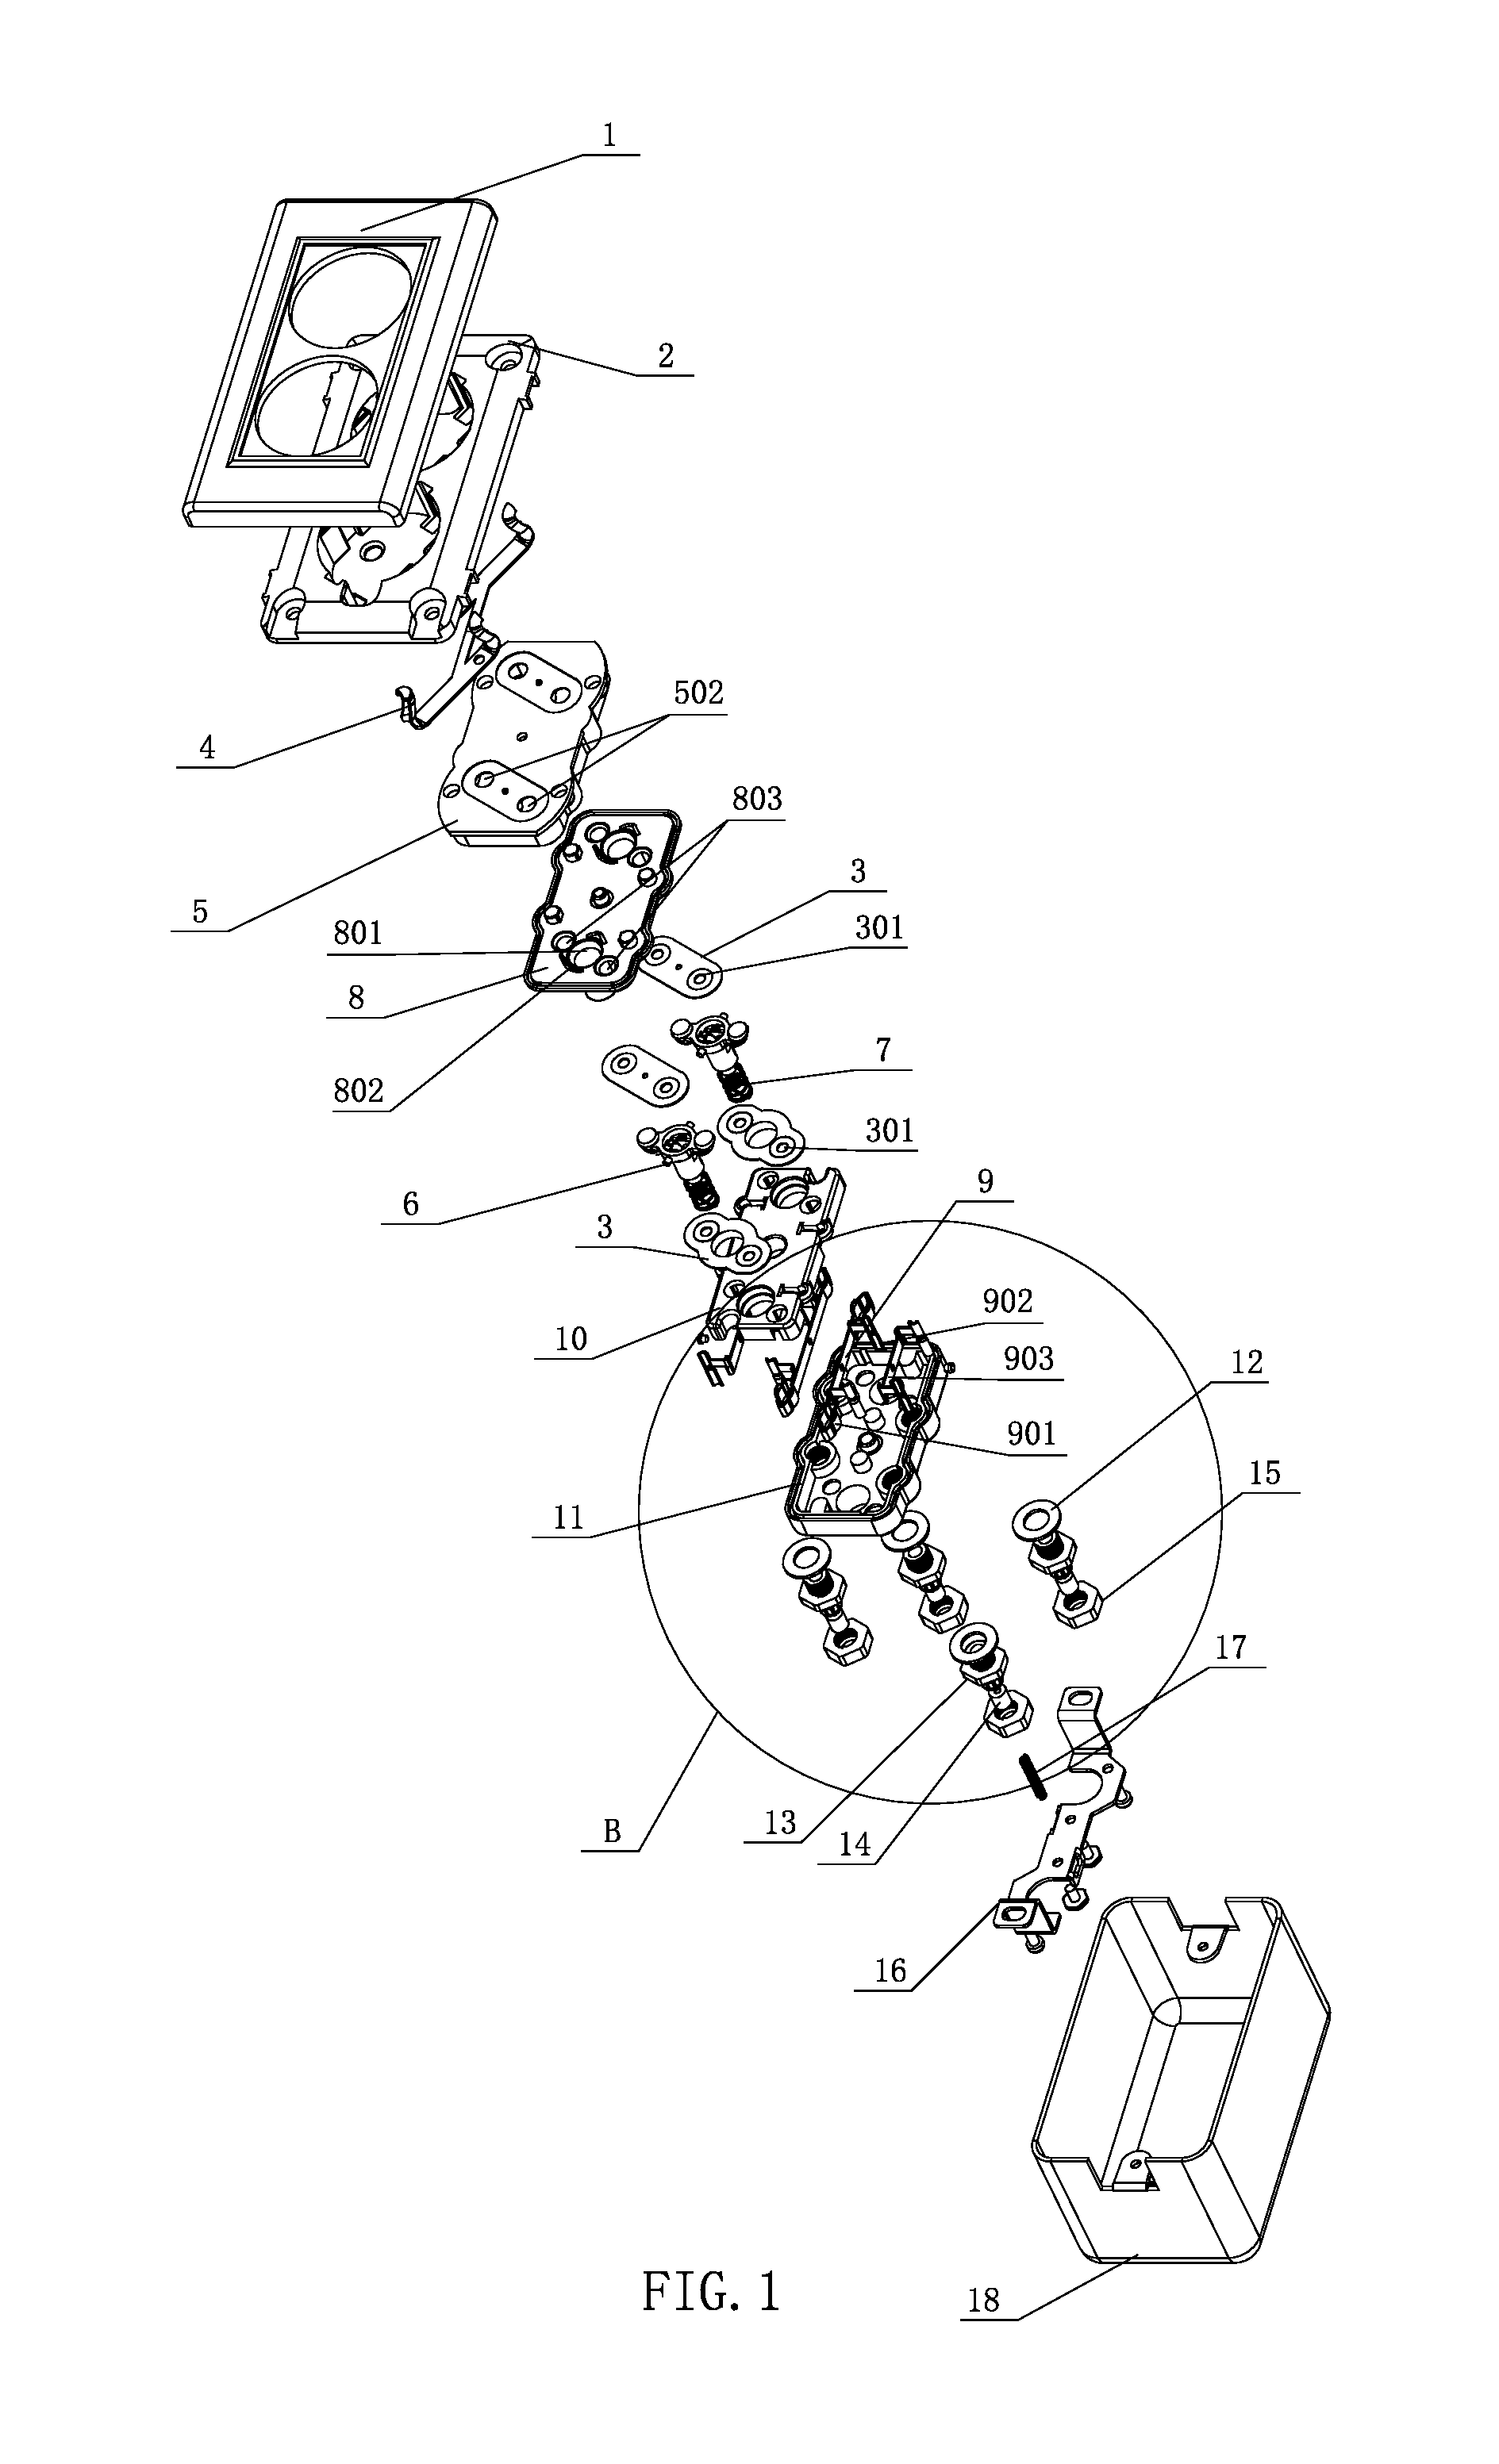 Waterproof socket having a waterproofing inner core movable between usage and non-usage positions